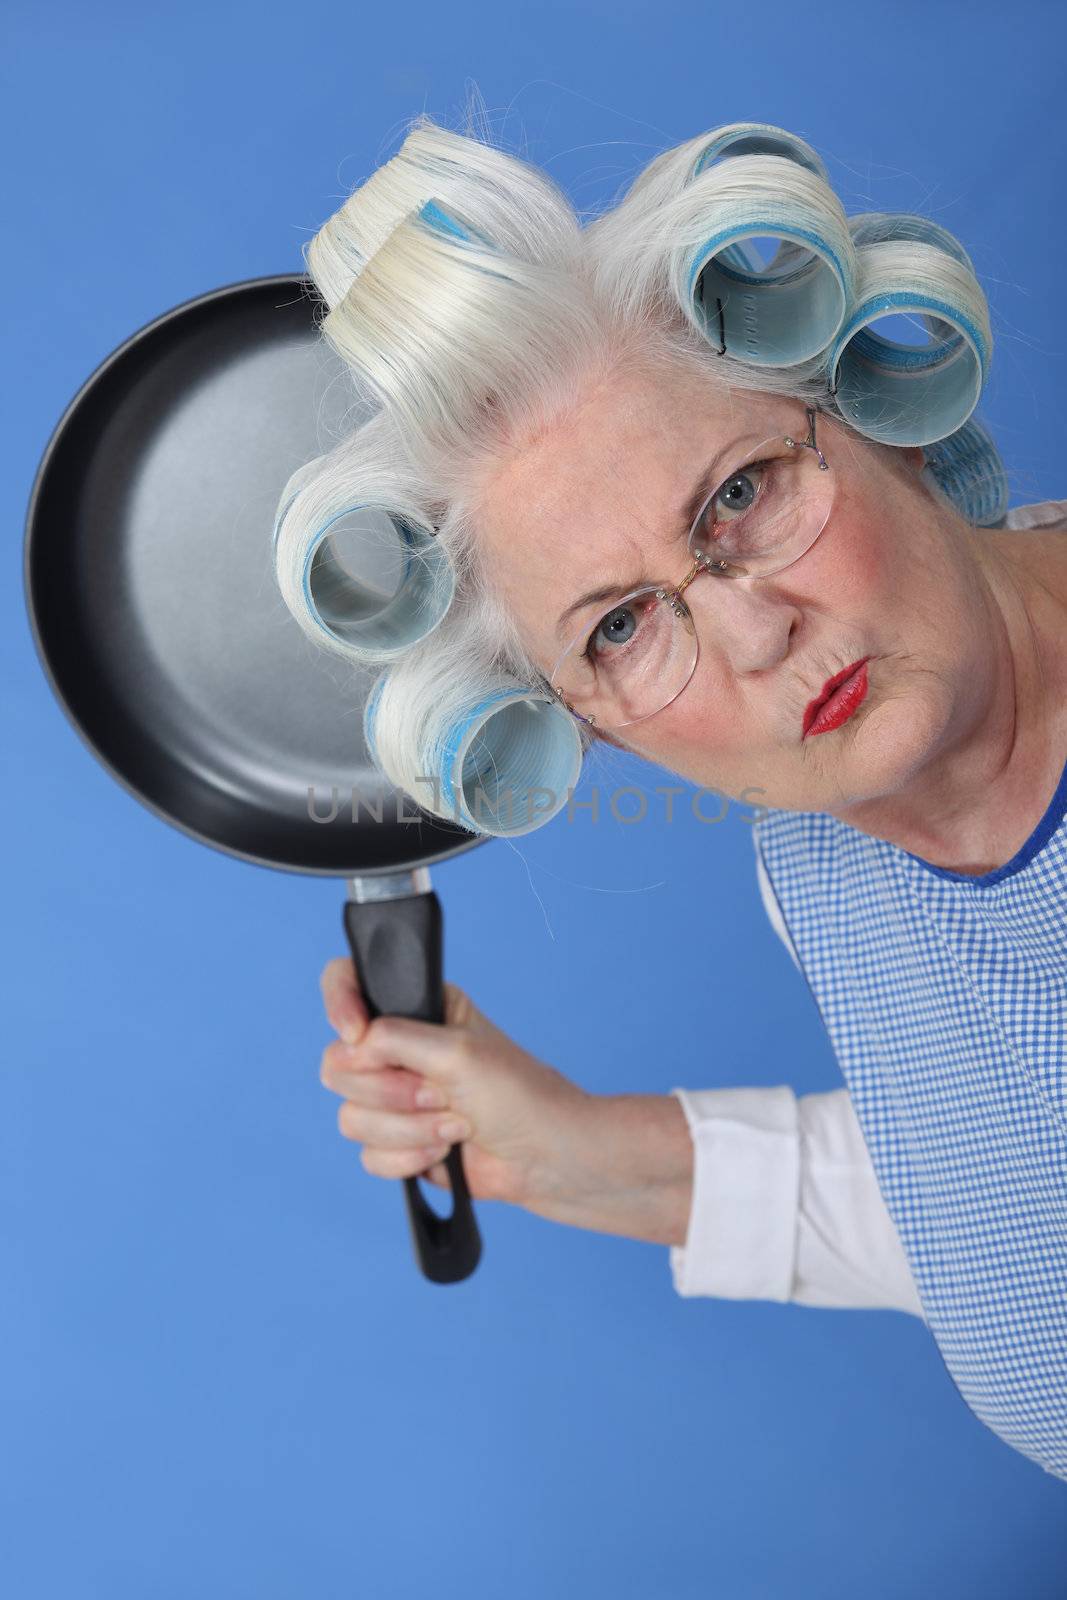 Angry old lady threatening to use frying pan by phovoir